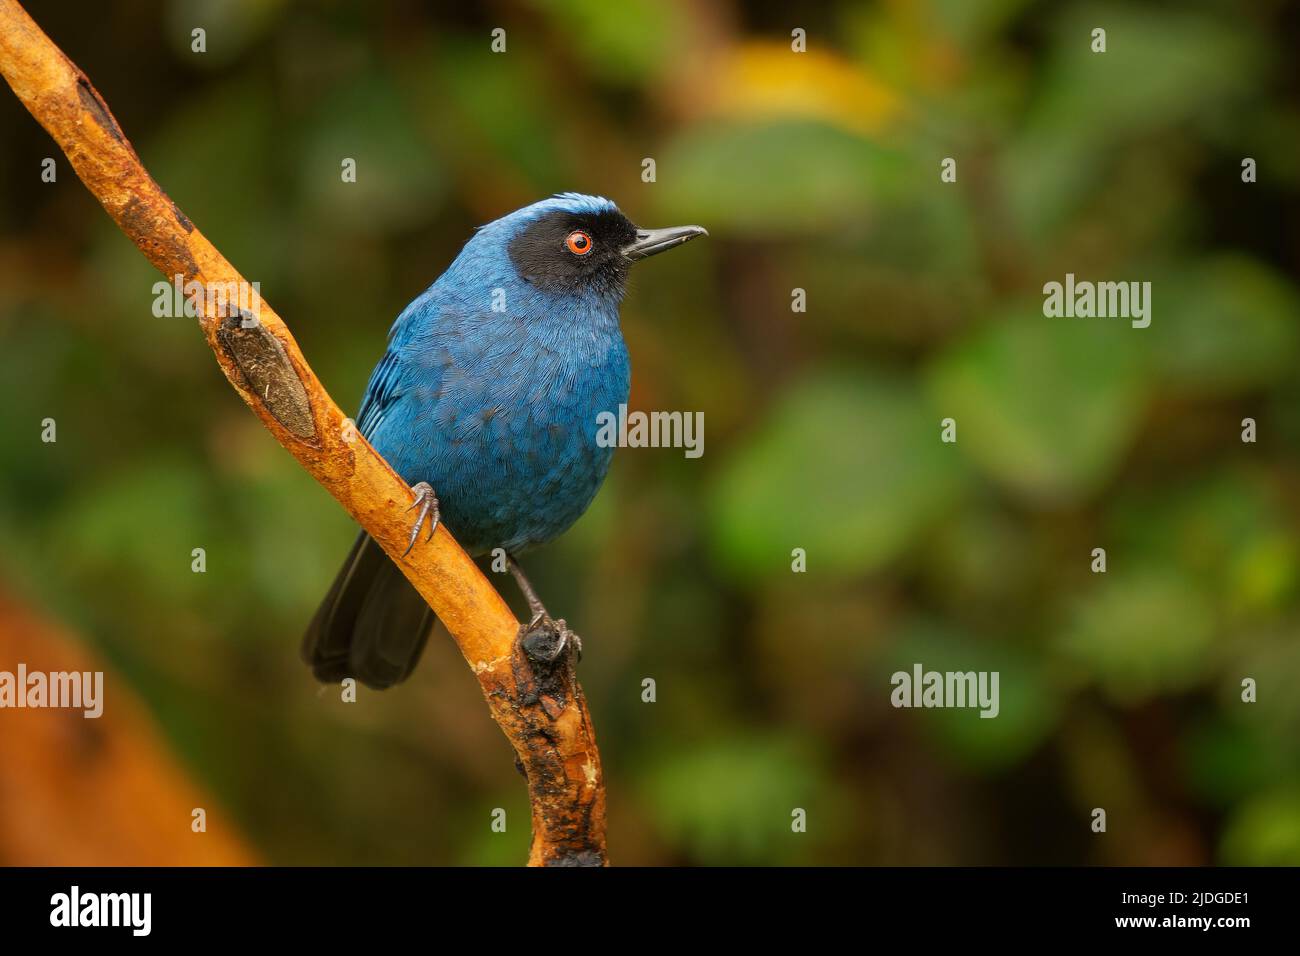 Masked Flowerpiercer - Diglossa cyanea blue tanager bird found in montane forest and scrub in South America, sharp hook on the mandible to slice open Stock Photo